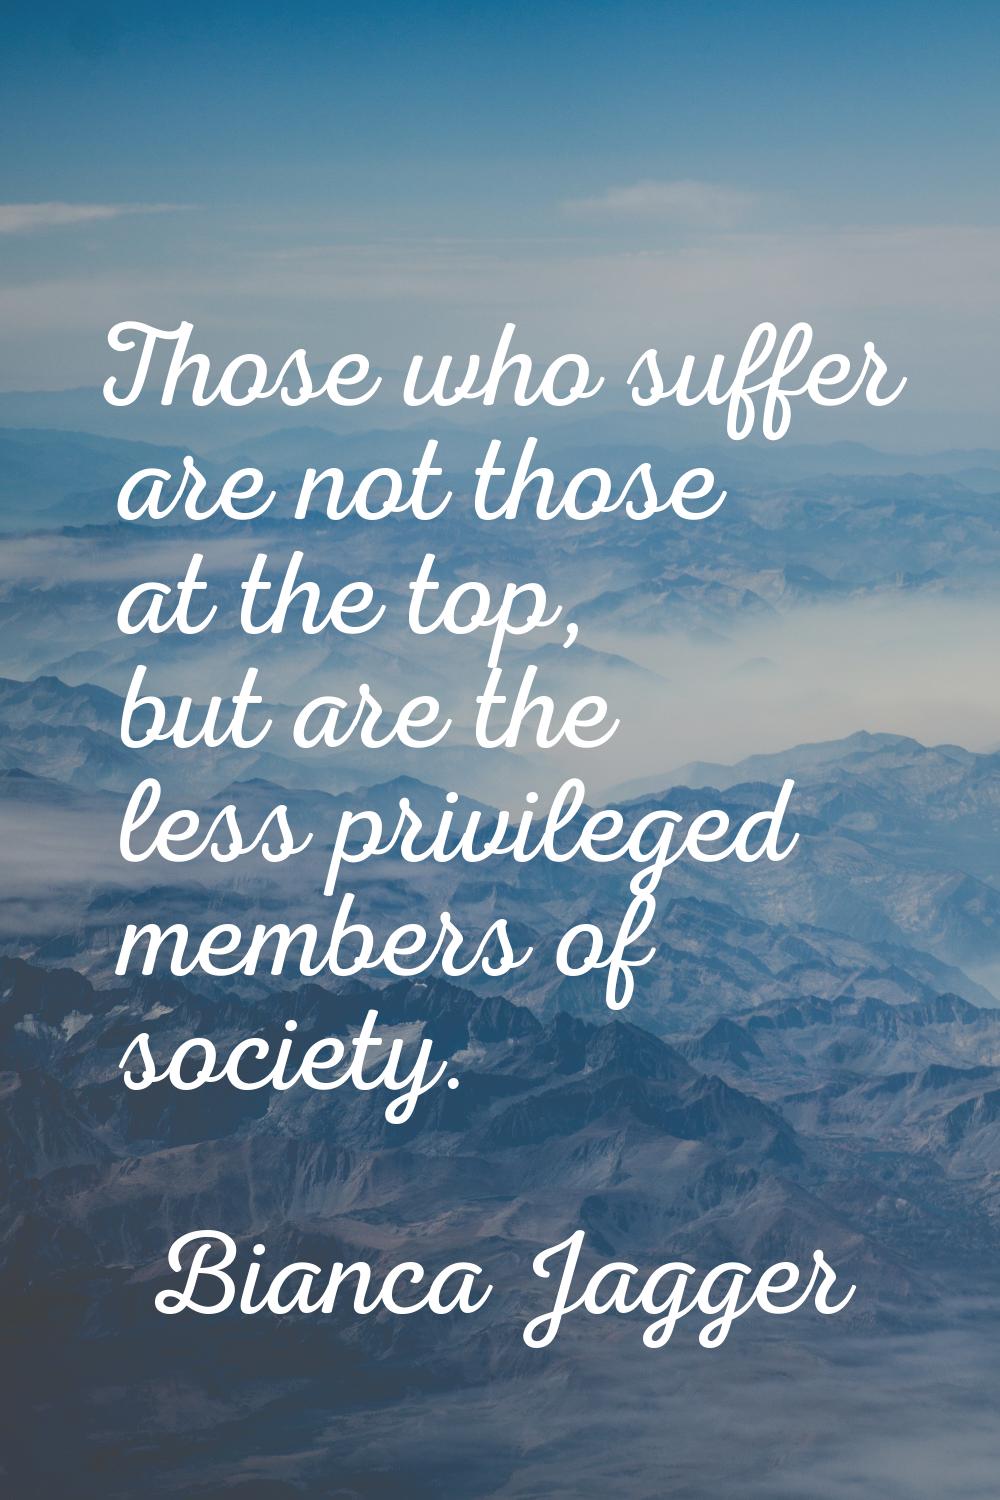 Those who suffer are not those at the top, but are the less privileged members of society.